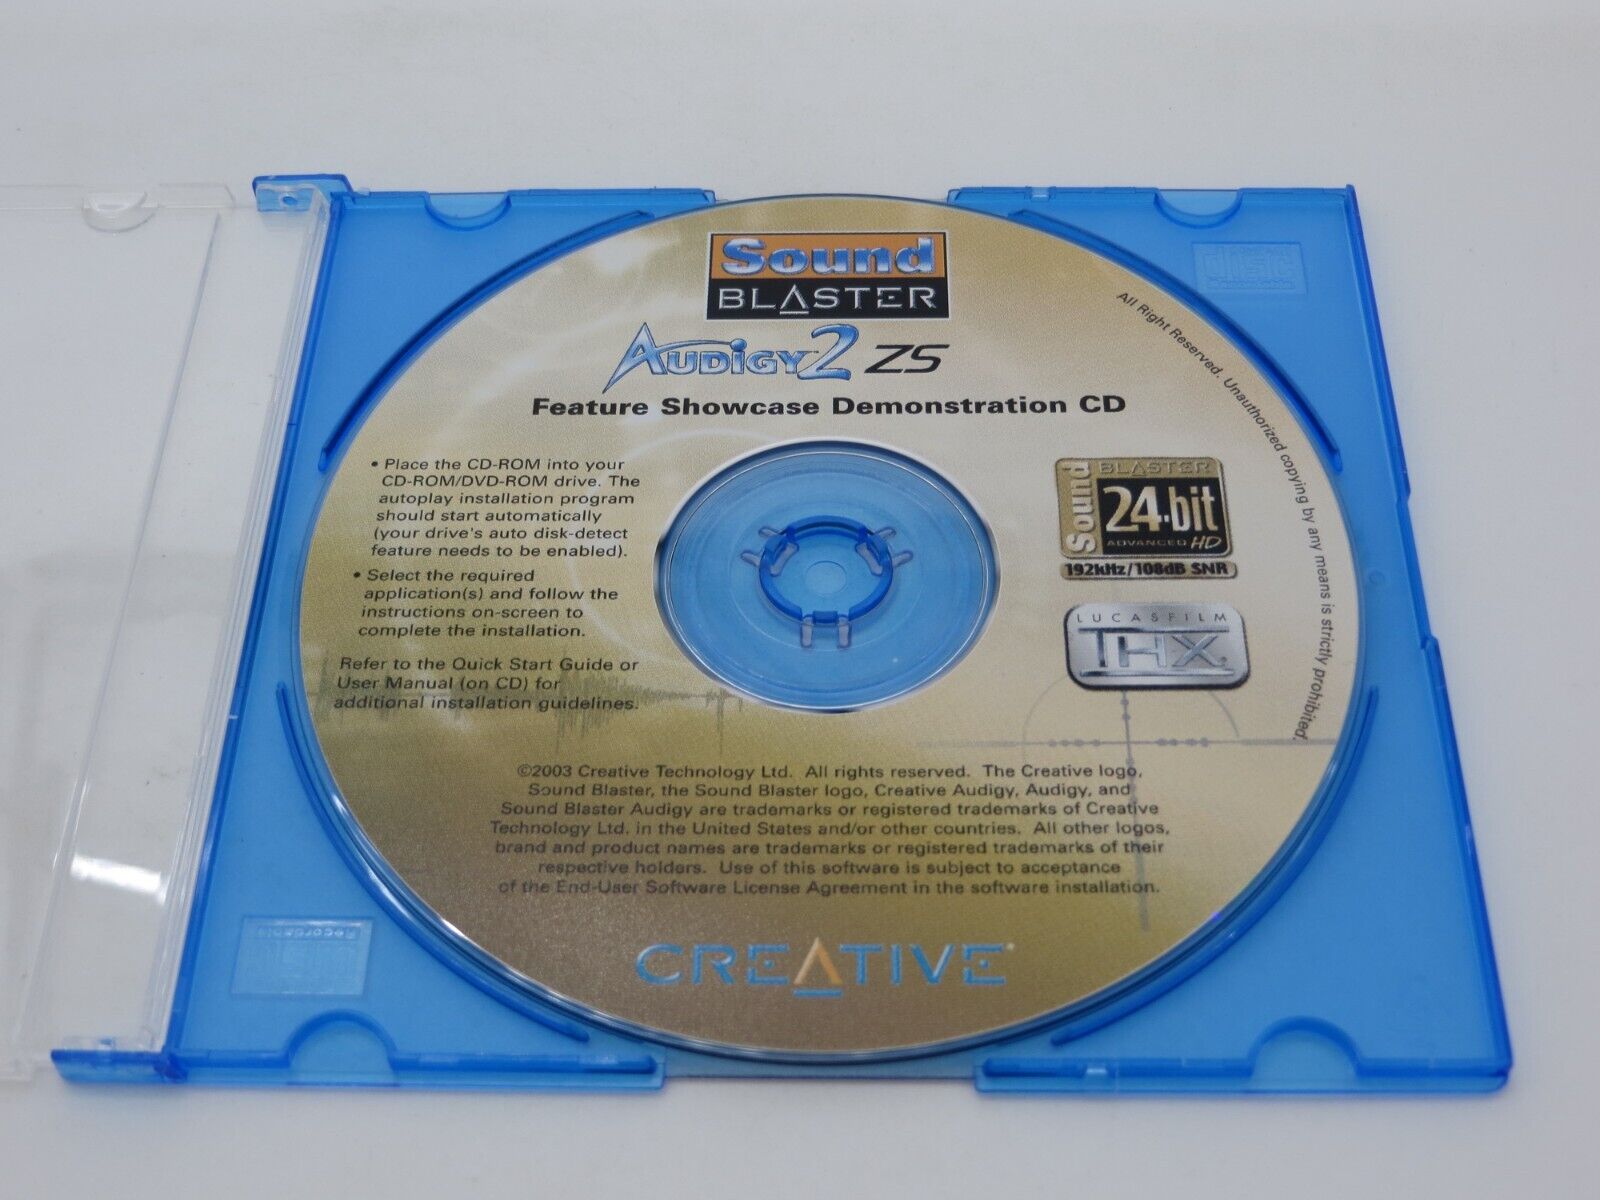 Creative Sound Blaster Audigy 2 Z5 Feature Showcase Demonstration CD disc disk